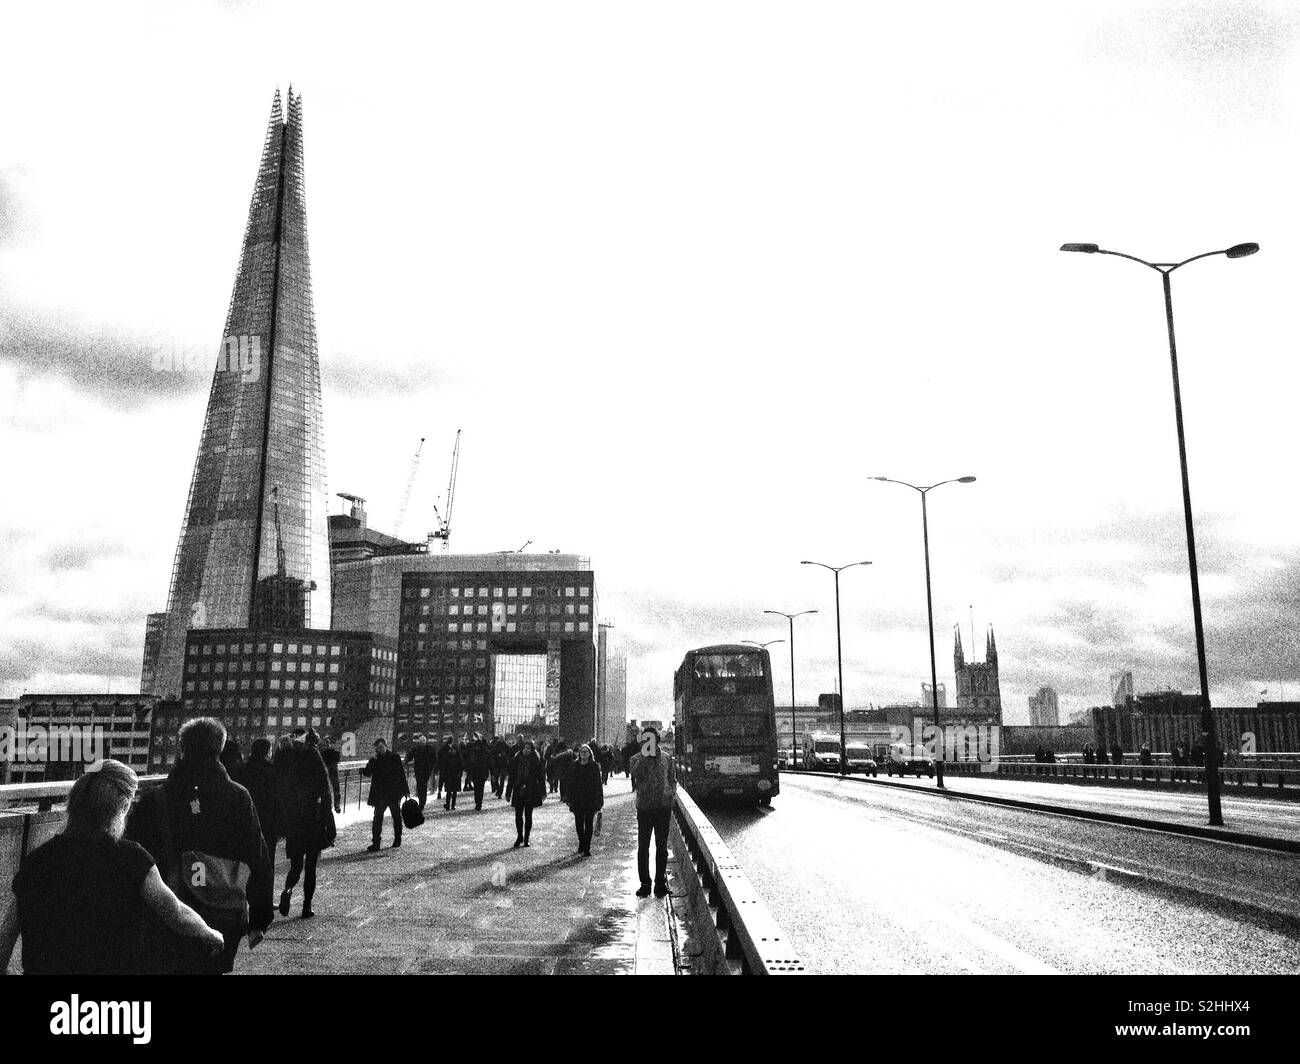 View looking across London Bridge towards Southwark cathedral and the Shard building in England, U.K. Stock Photo